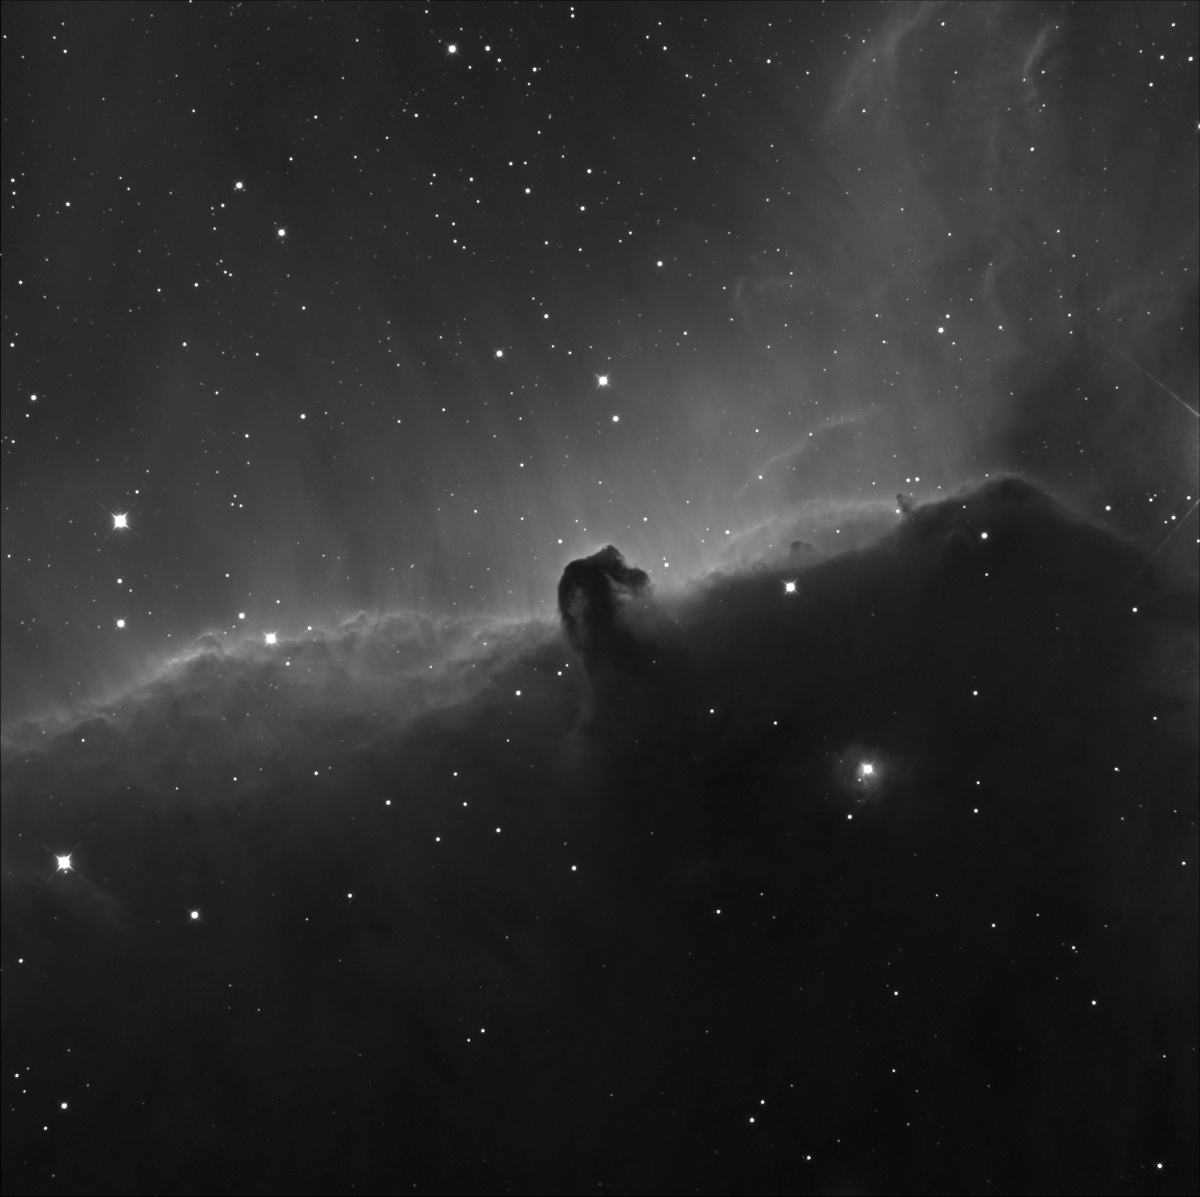 Astrophotography, Horsehead nebula before HDR processing